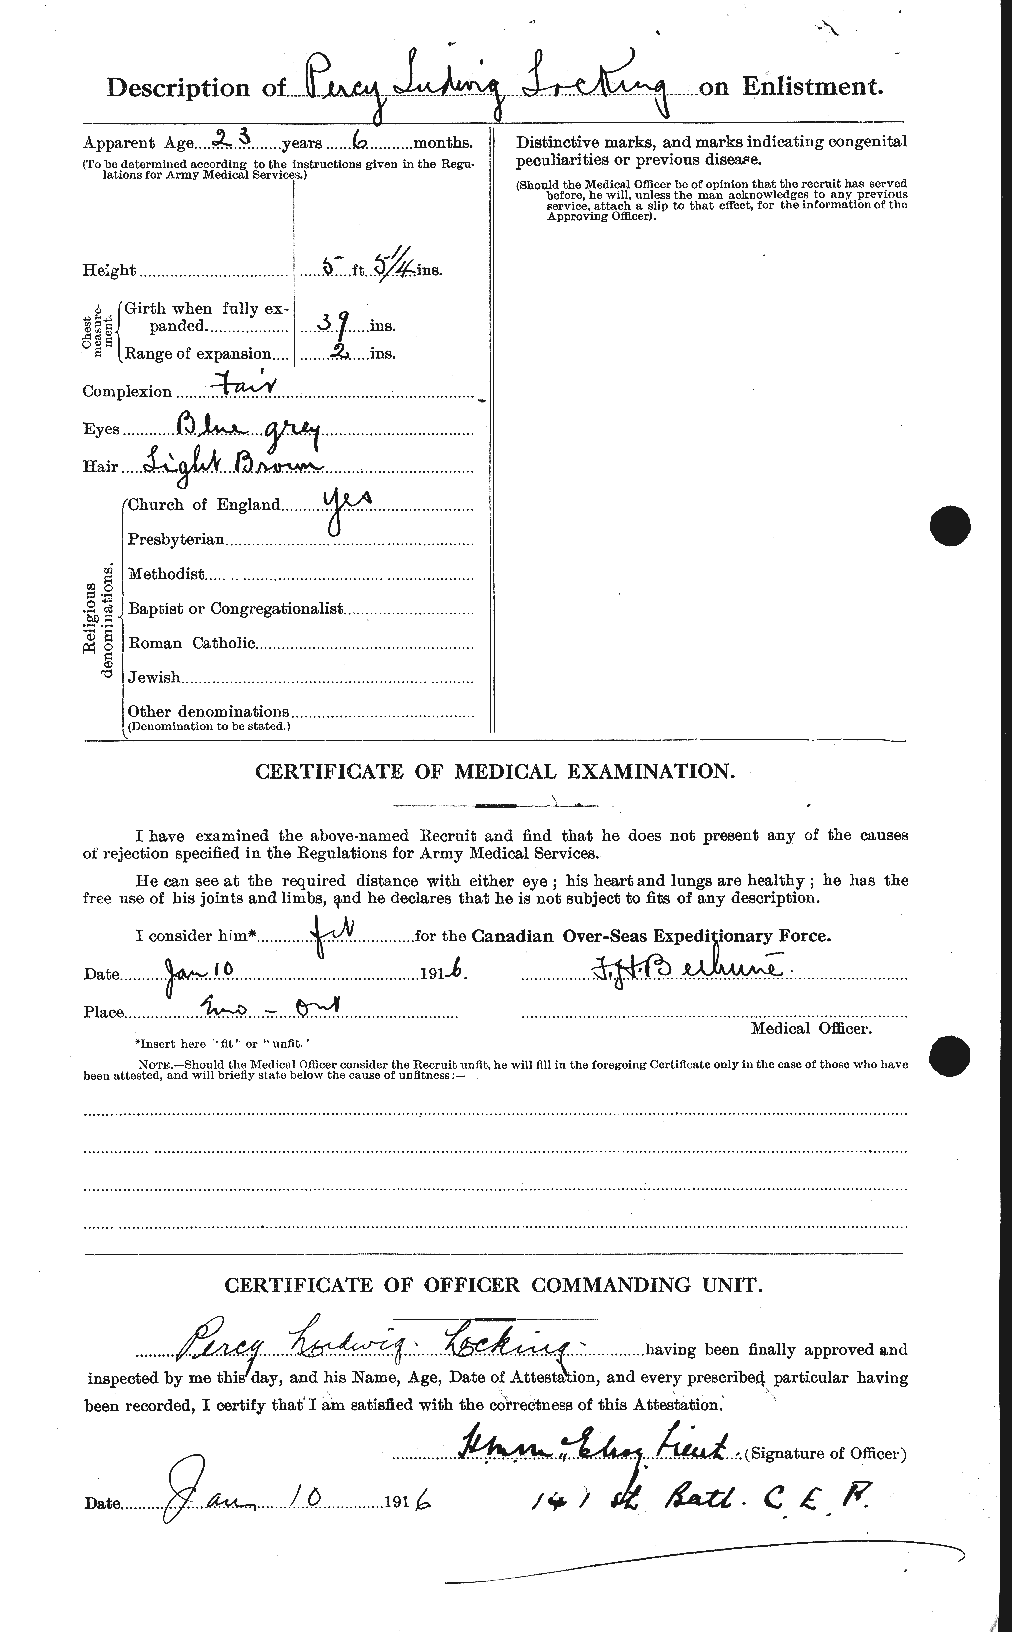 Personnel Records of the First World War - CEF 464640b